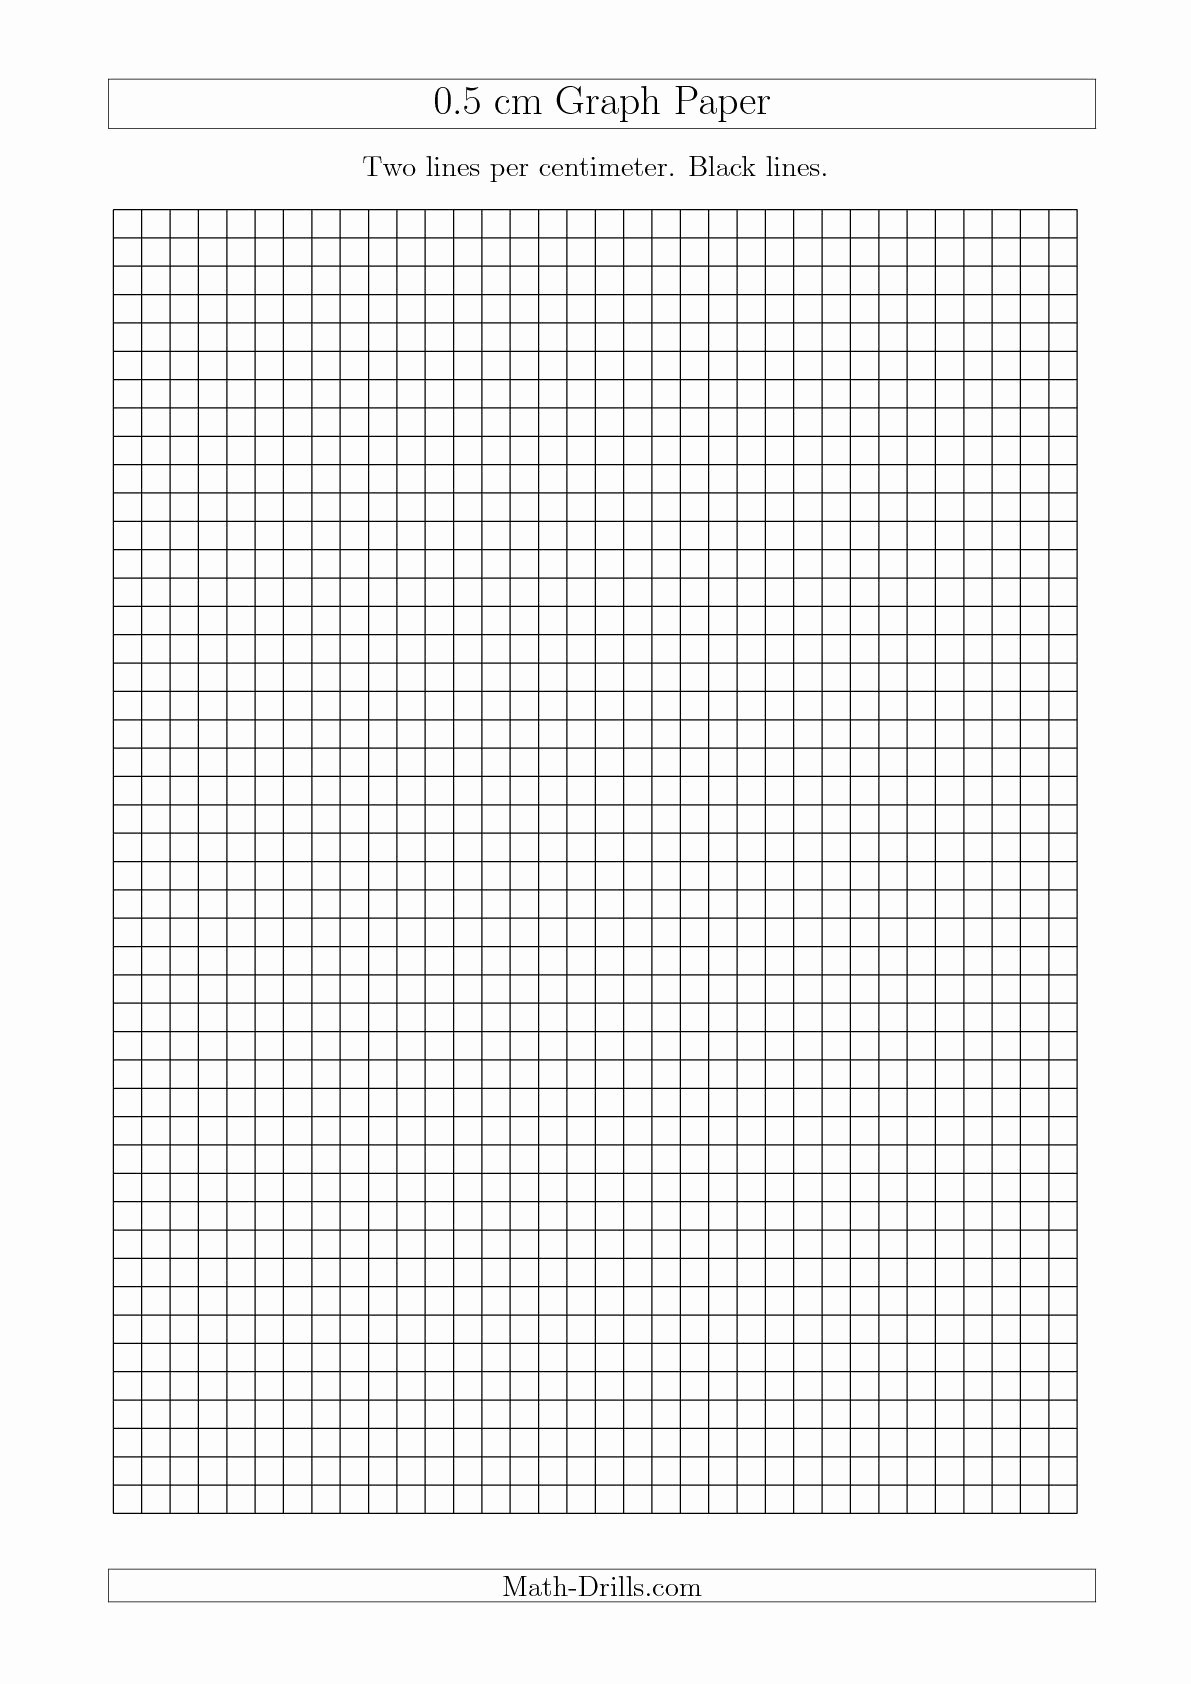 Printable Graph Paper Black Lines New the 0 5 Cm Graph Paper with Black Lines A4 Size A Math